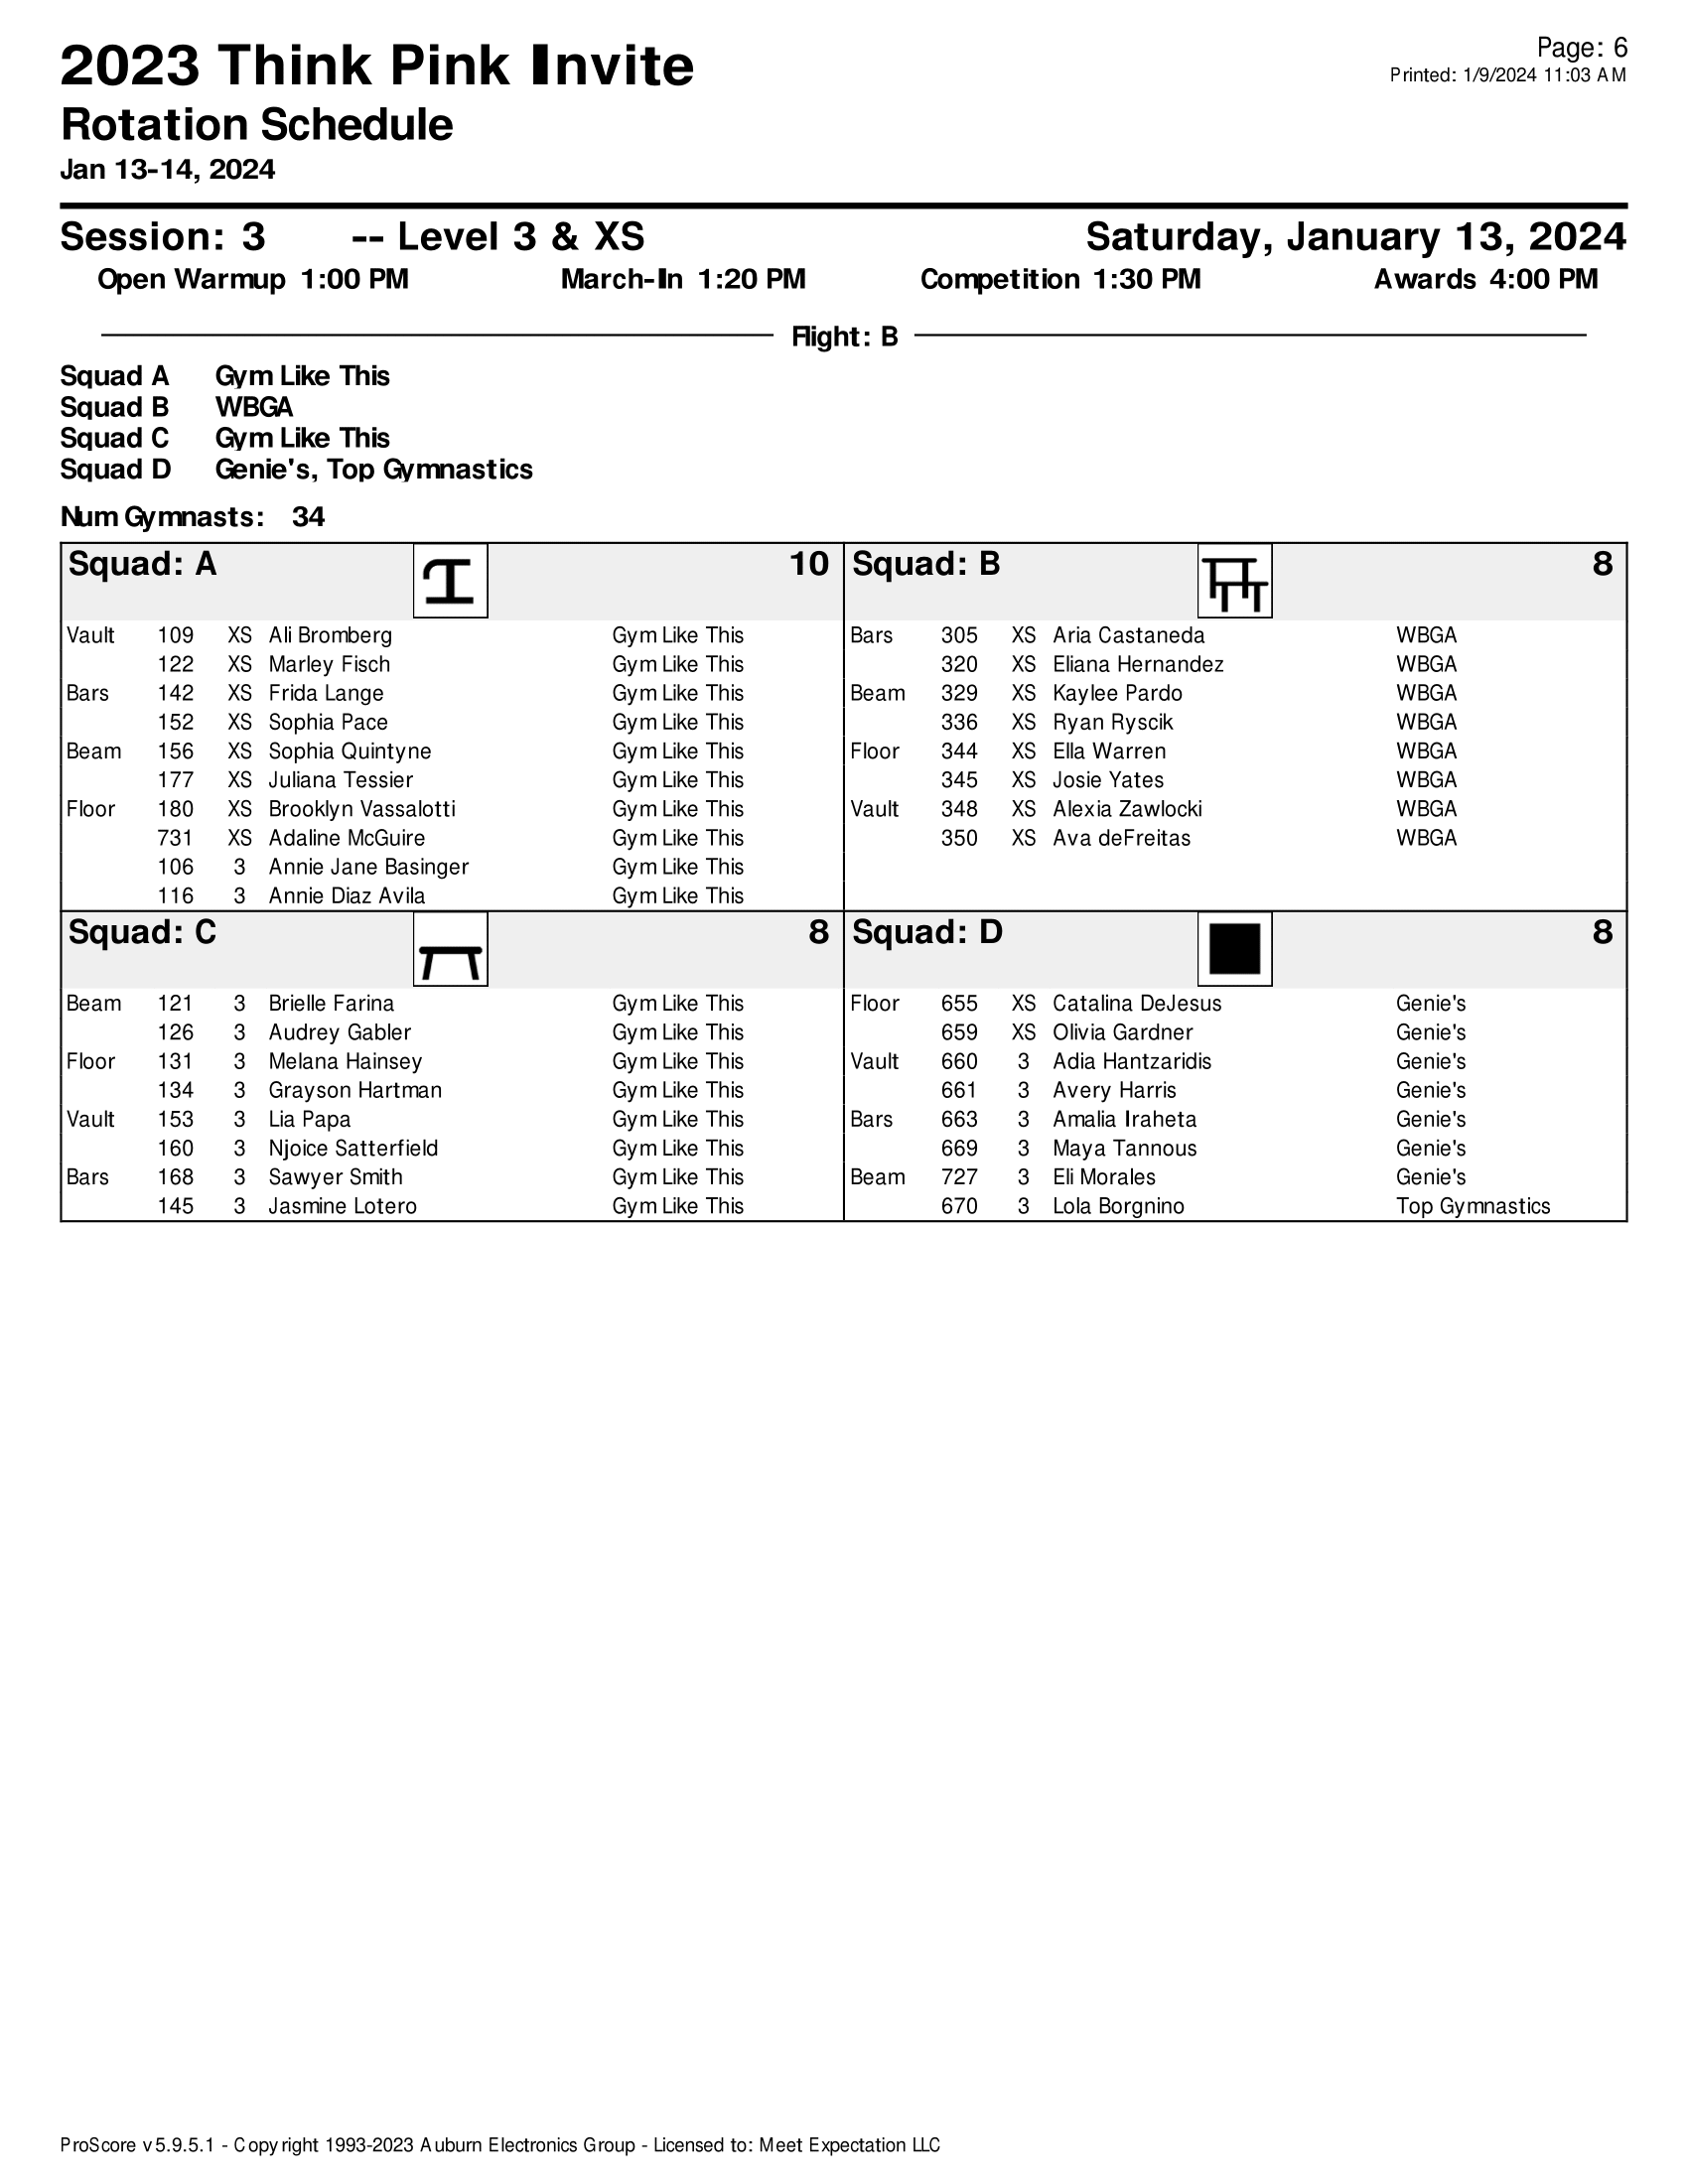 Rotation Sheets updated-06